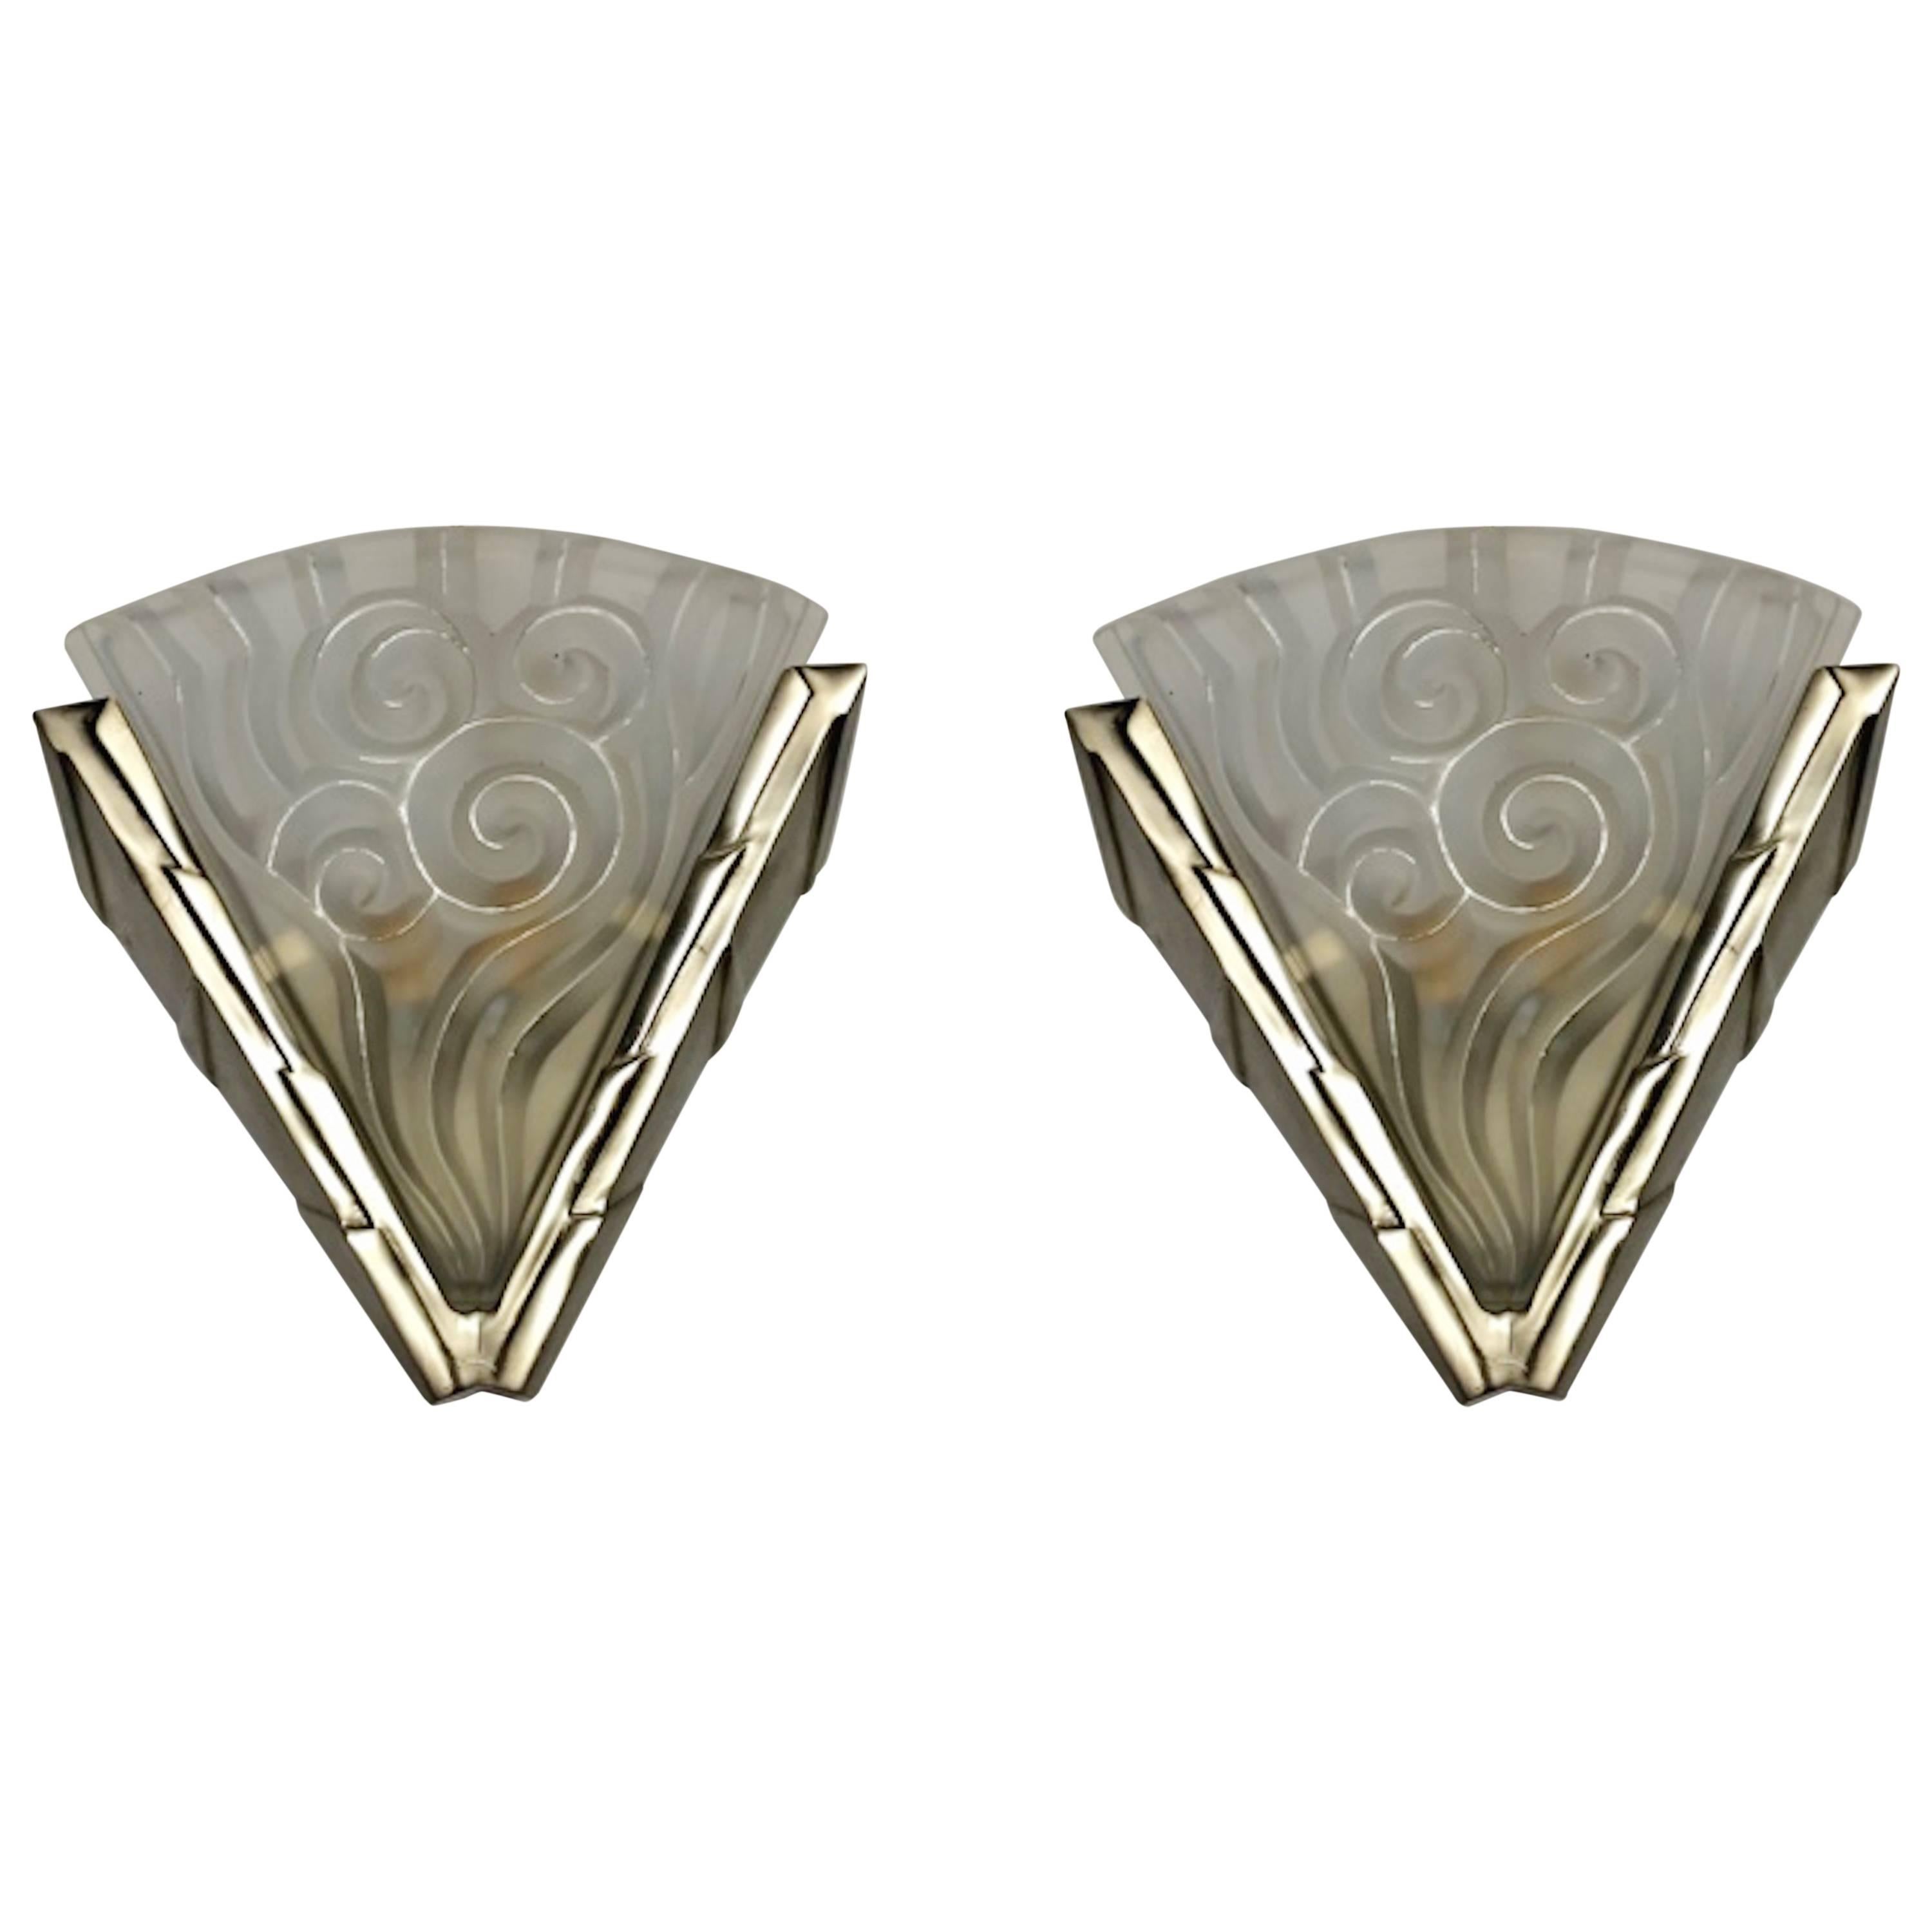 Pair of French Art Deco Wall Sconces by “Degue“ For Sale